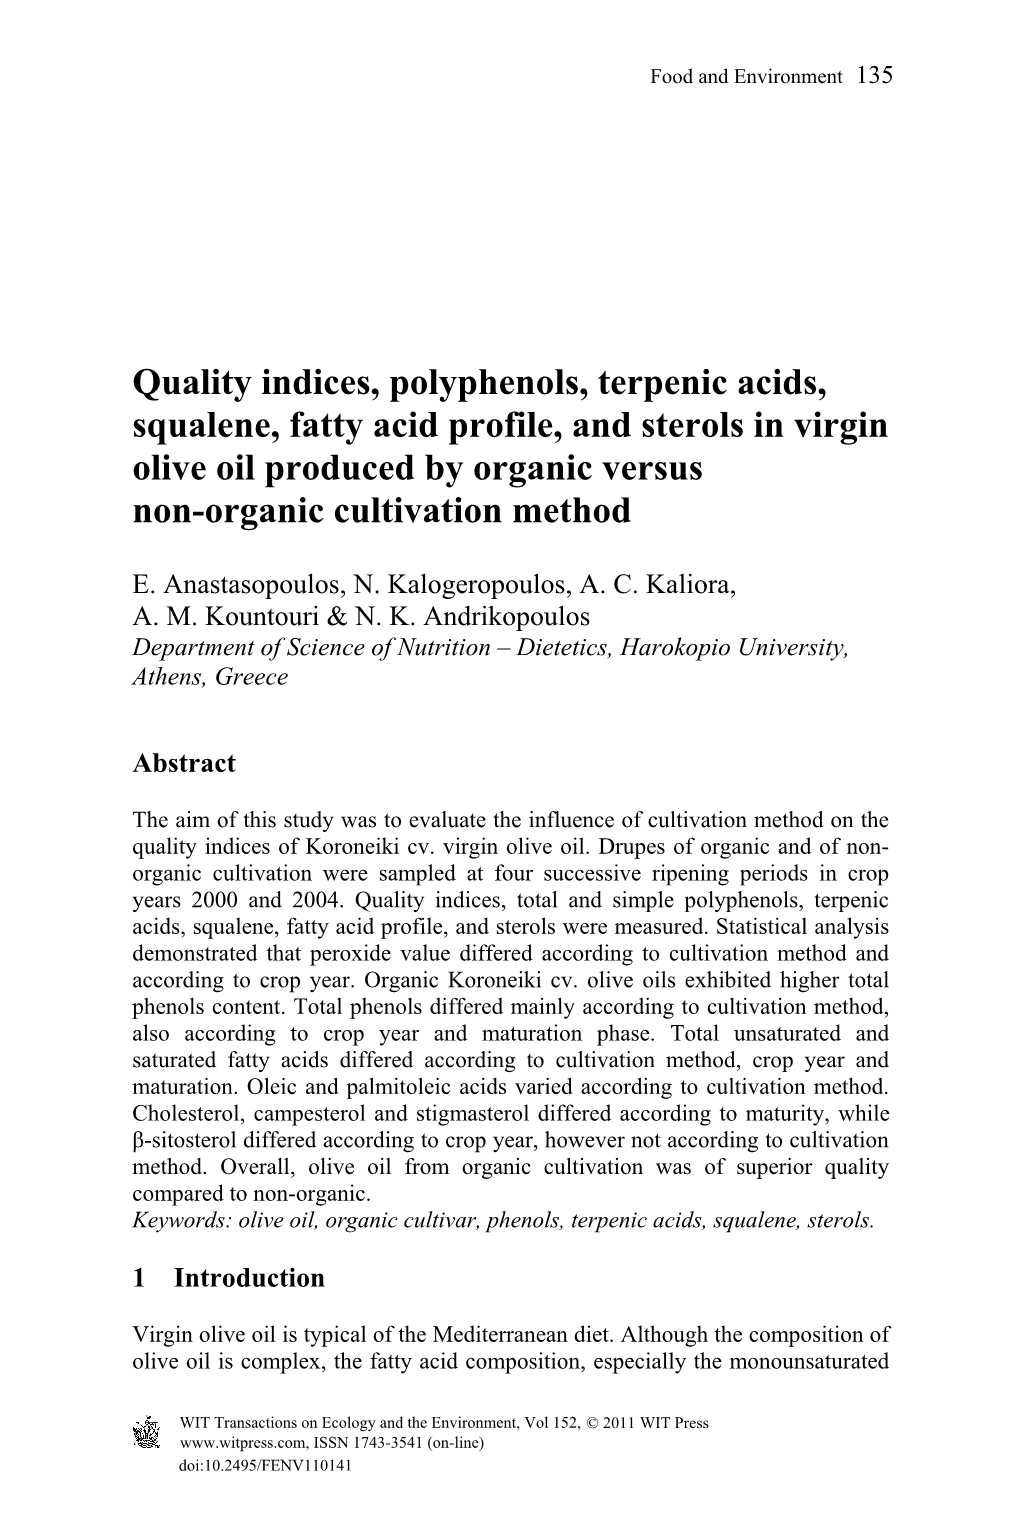 Quality Indices, Polyphenols, Terpenic Acids, Squalene, Fatty Acid Profile, and Sterols in Virgin Olive Oil Produced by Organic Versus Non-Organic Cultivation Method